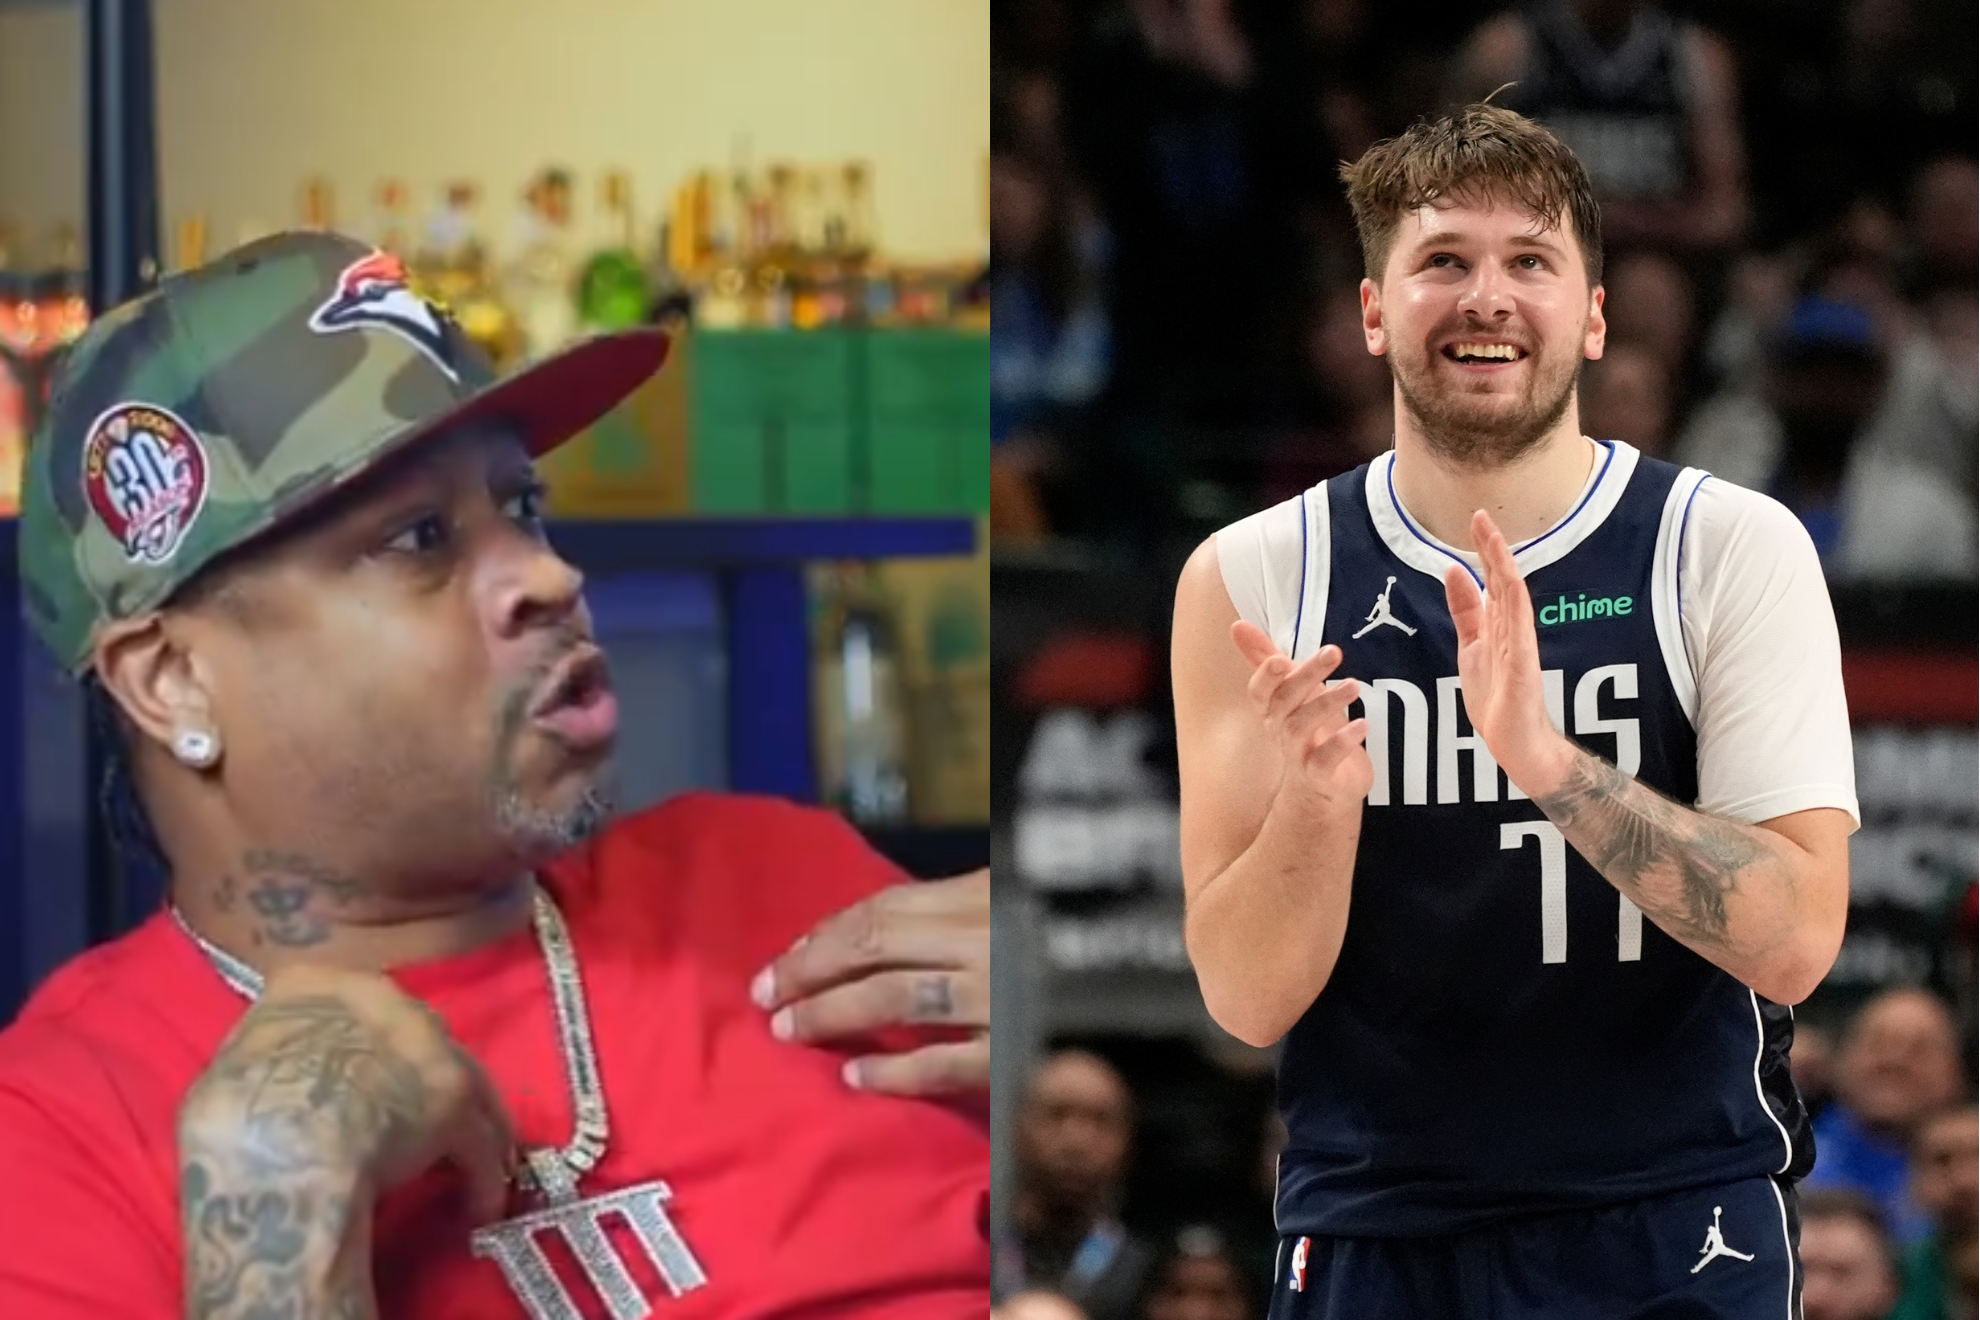 Iverson (left) spoke glowingly of Doncic (right).